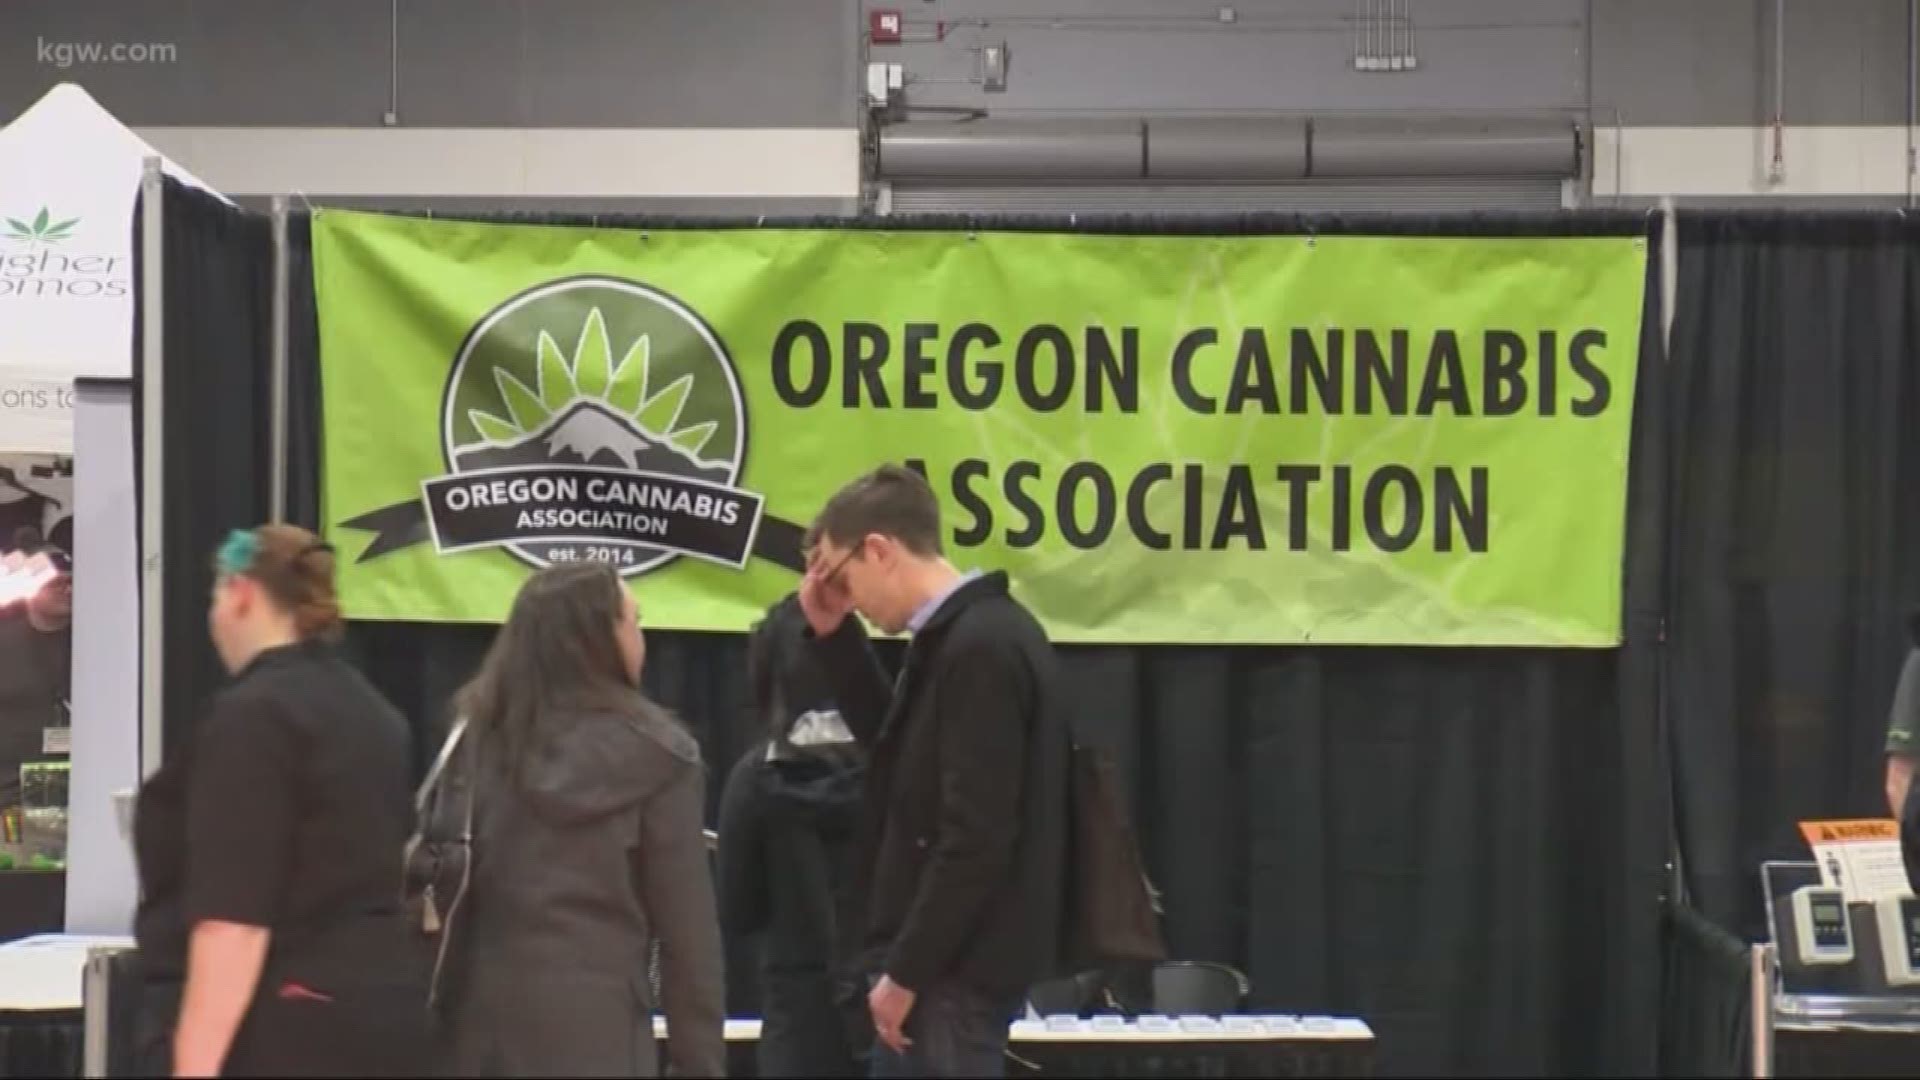 What's in store at the Cannabis Conference in Portland